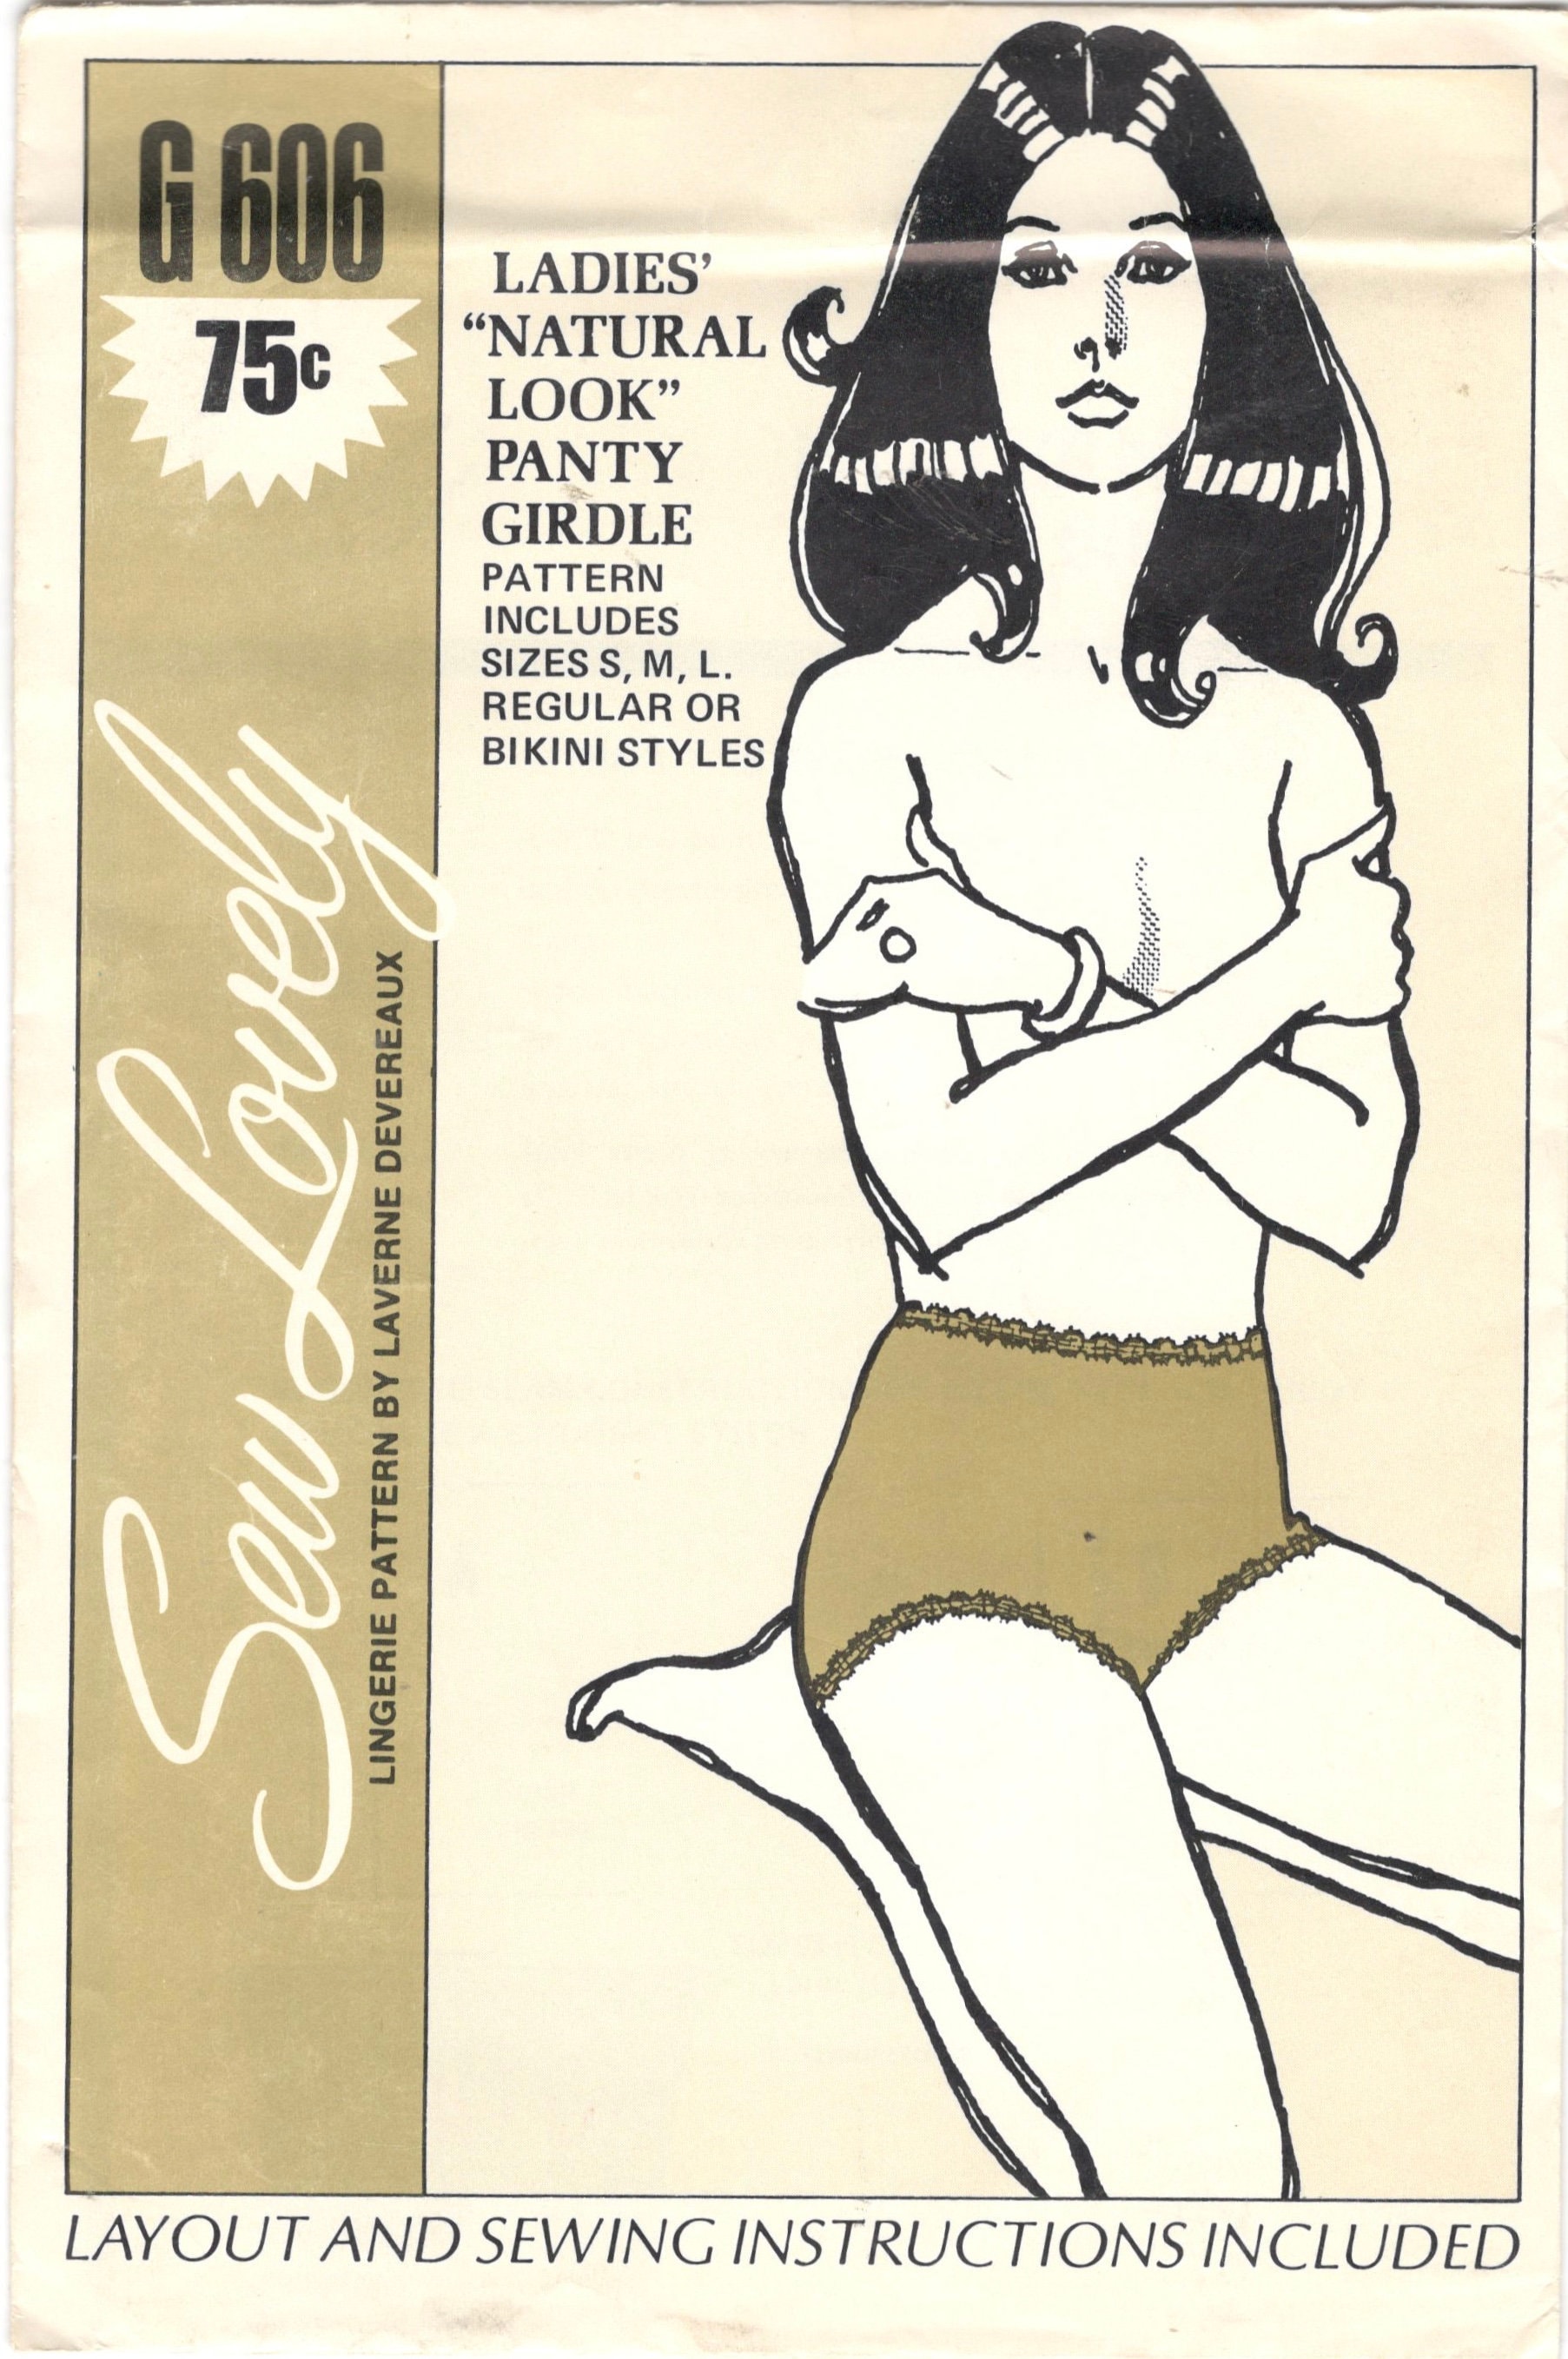 Sew Lovely G606 1970s Natural Look Panty Girdle Pattern Womens Vintage  Lingerie Sewing Pattern Size Small Medium Large Hip 34 44 UNCUT 